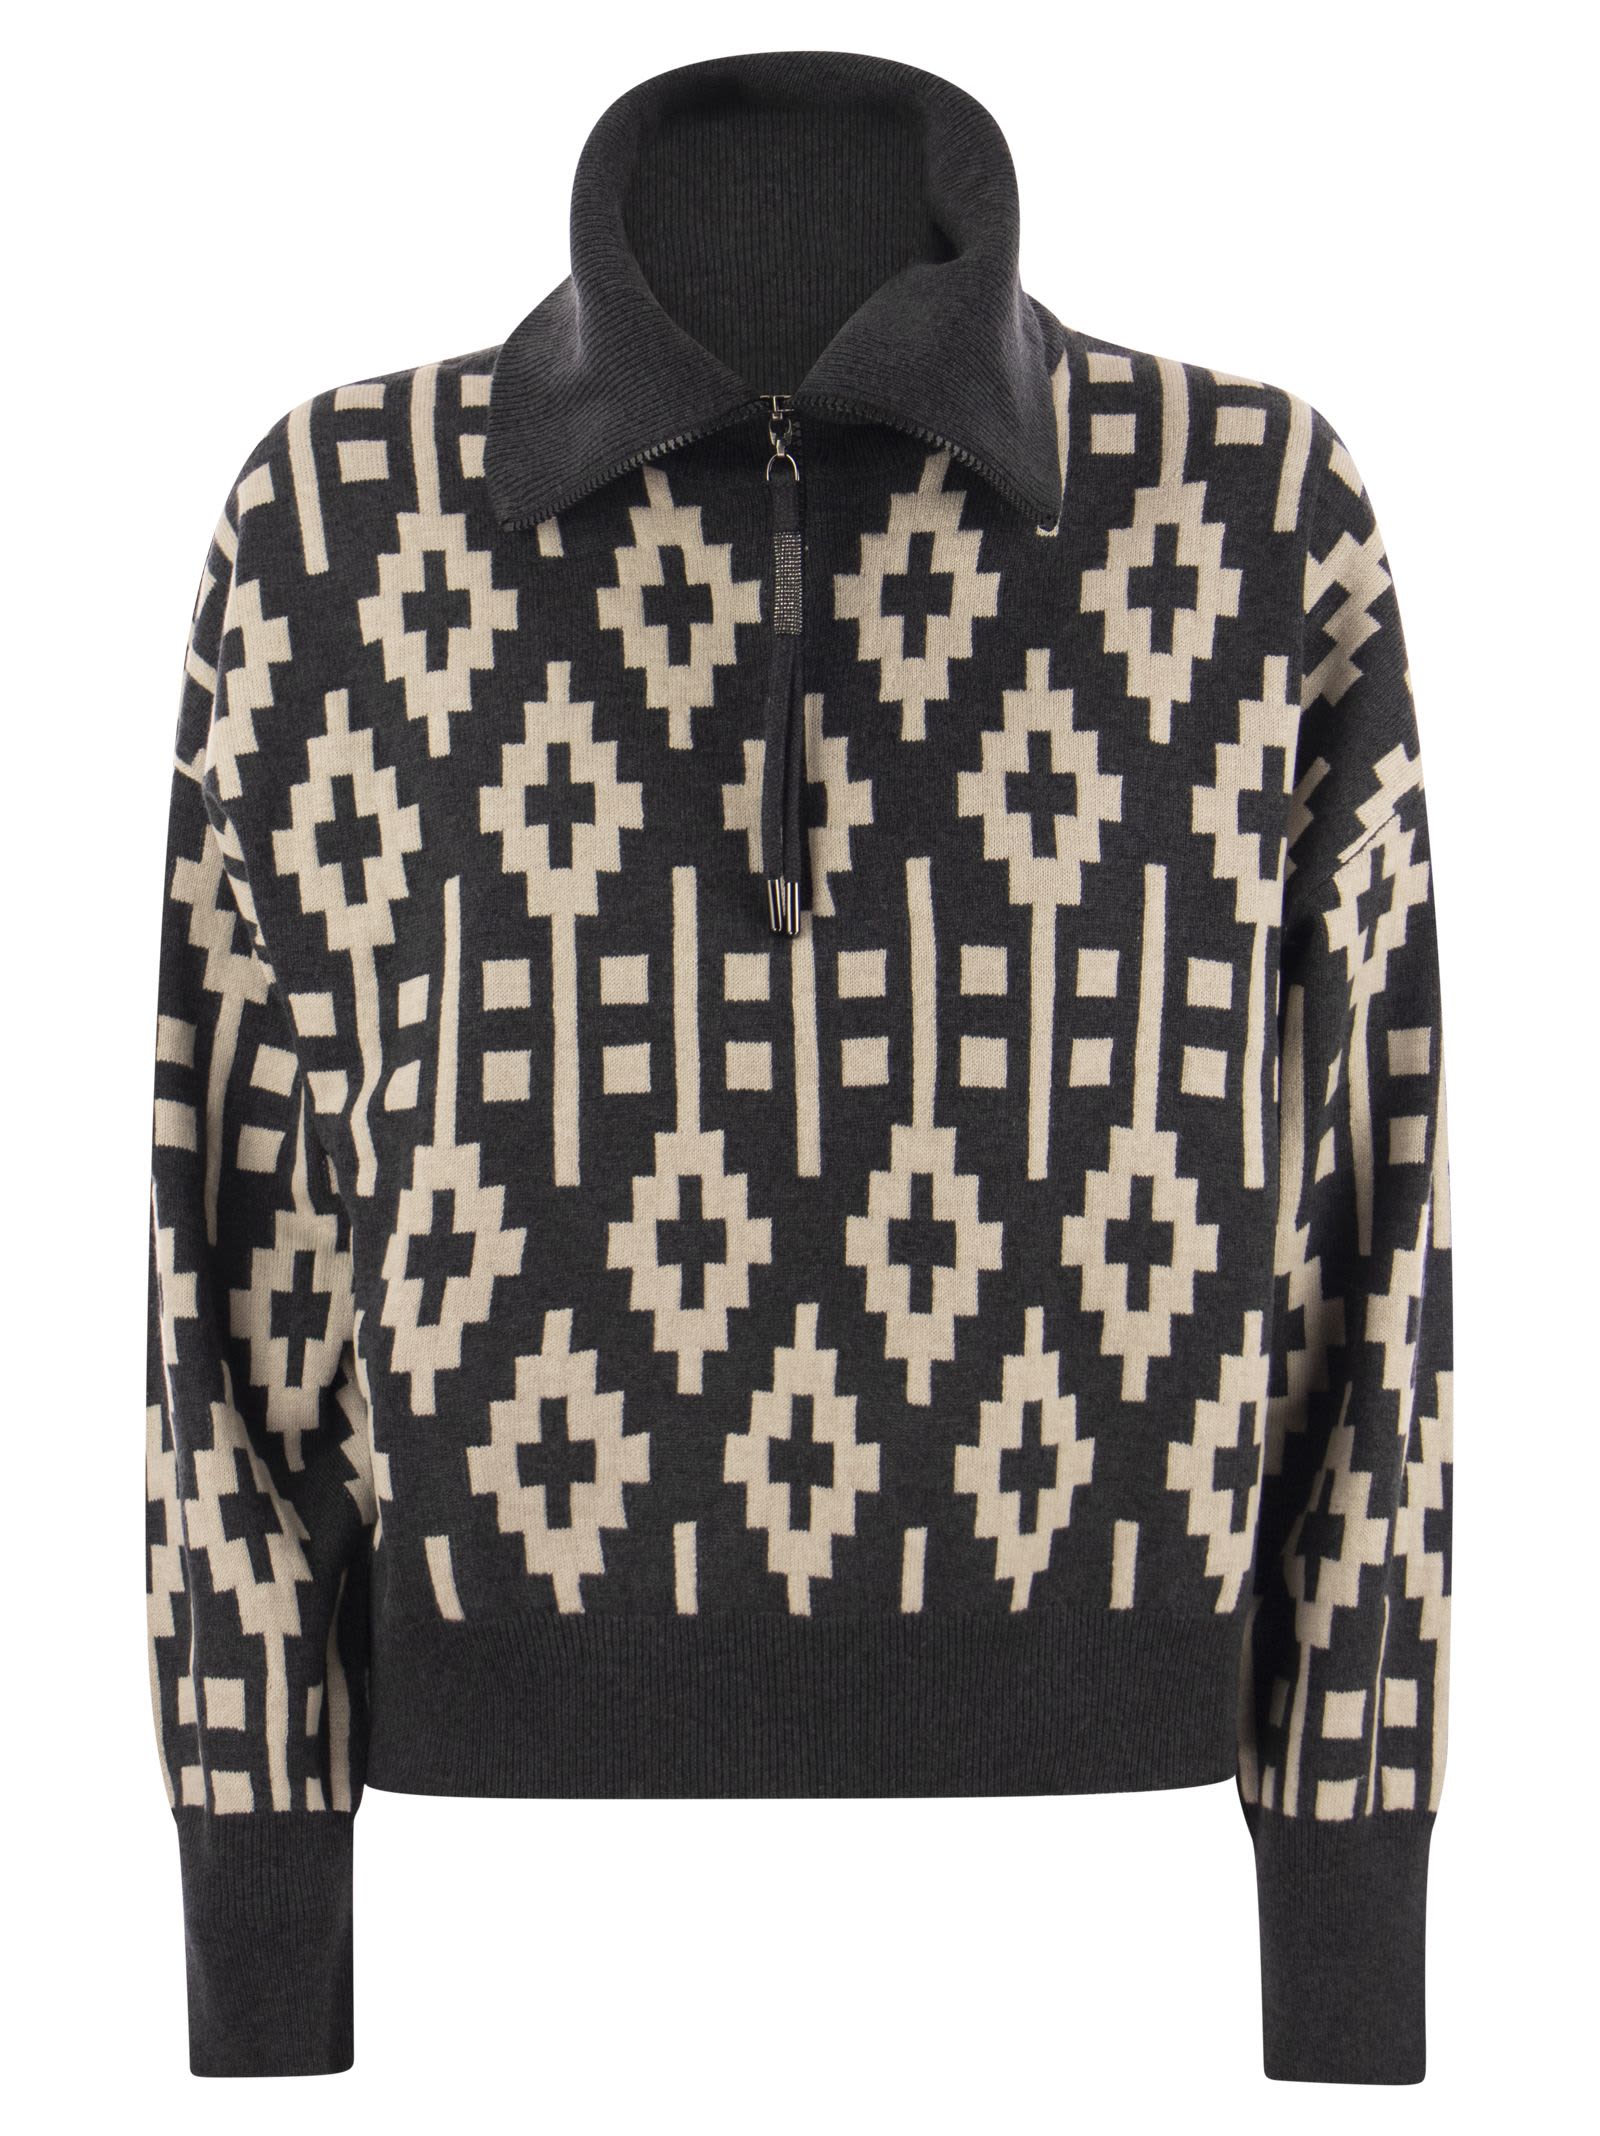 BRUNELLO CUCINELLI VINTAGE JACQUARD SWEATER IN VIRGIN WOOL, CASHMERE AND SILK WITH SHINY HALF ZIP